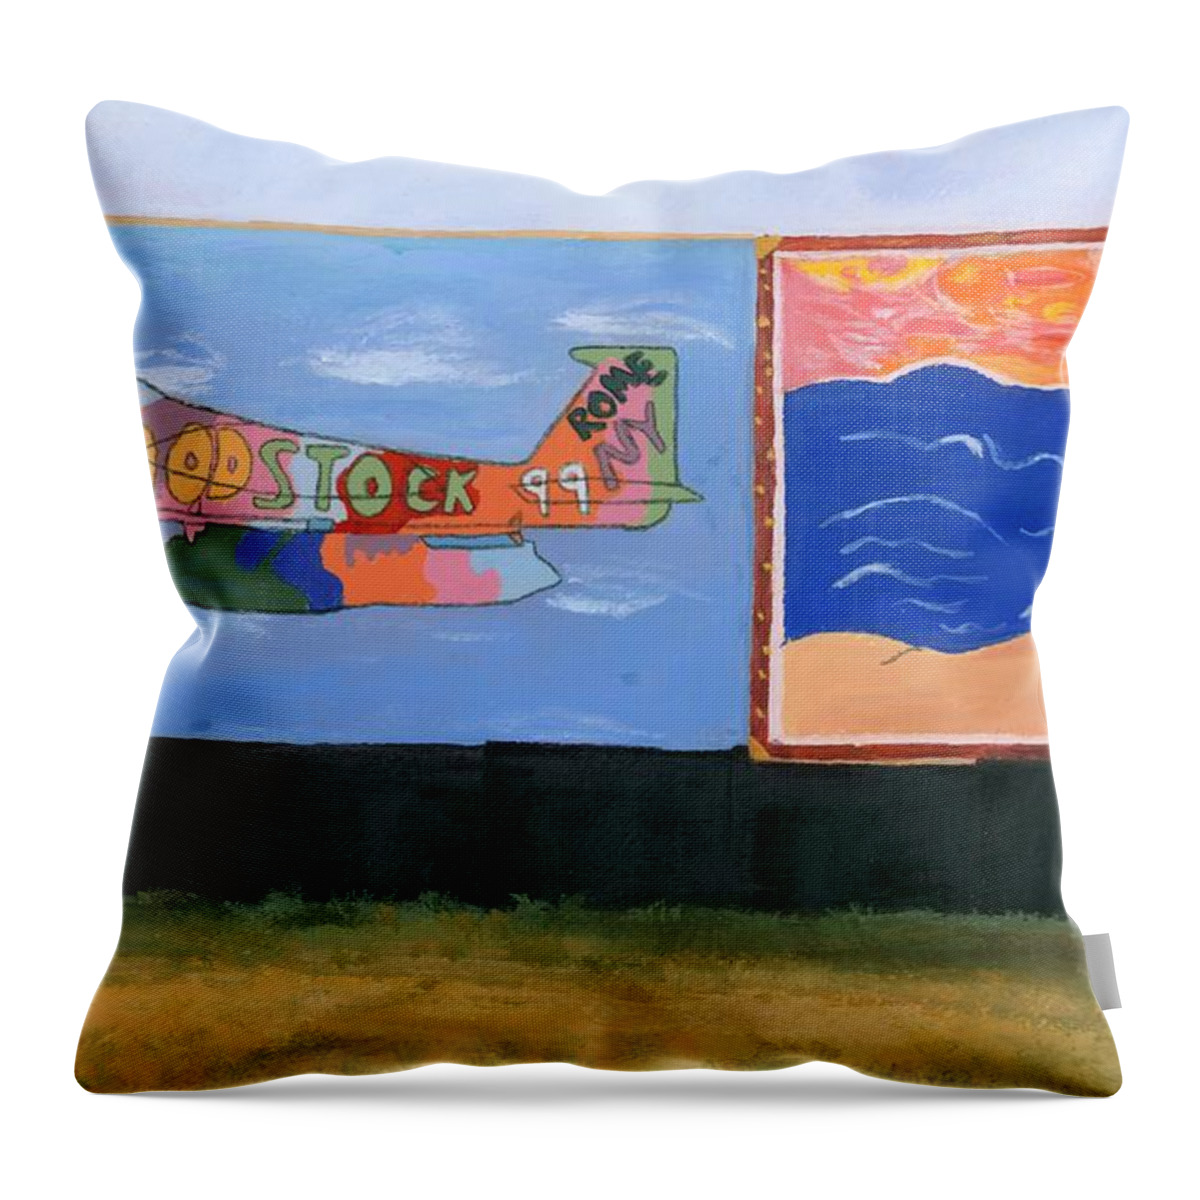 Acrylic Throw Pillow featuring the painting Woodstock 99 Revisited by Lynne Reichhart